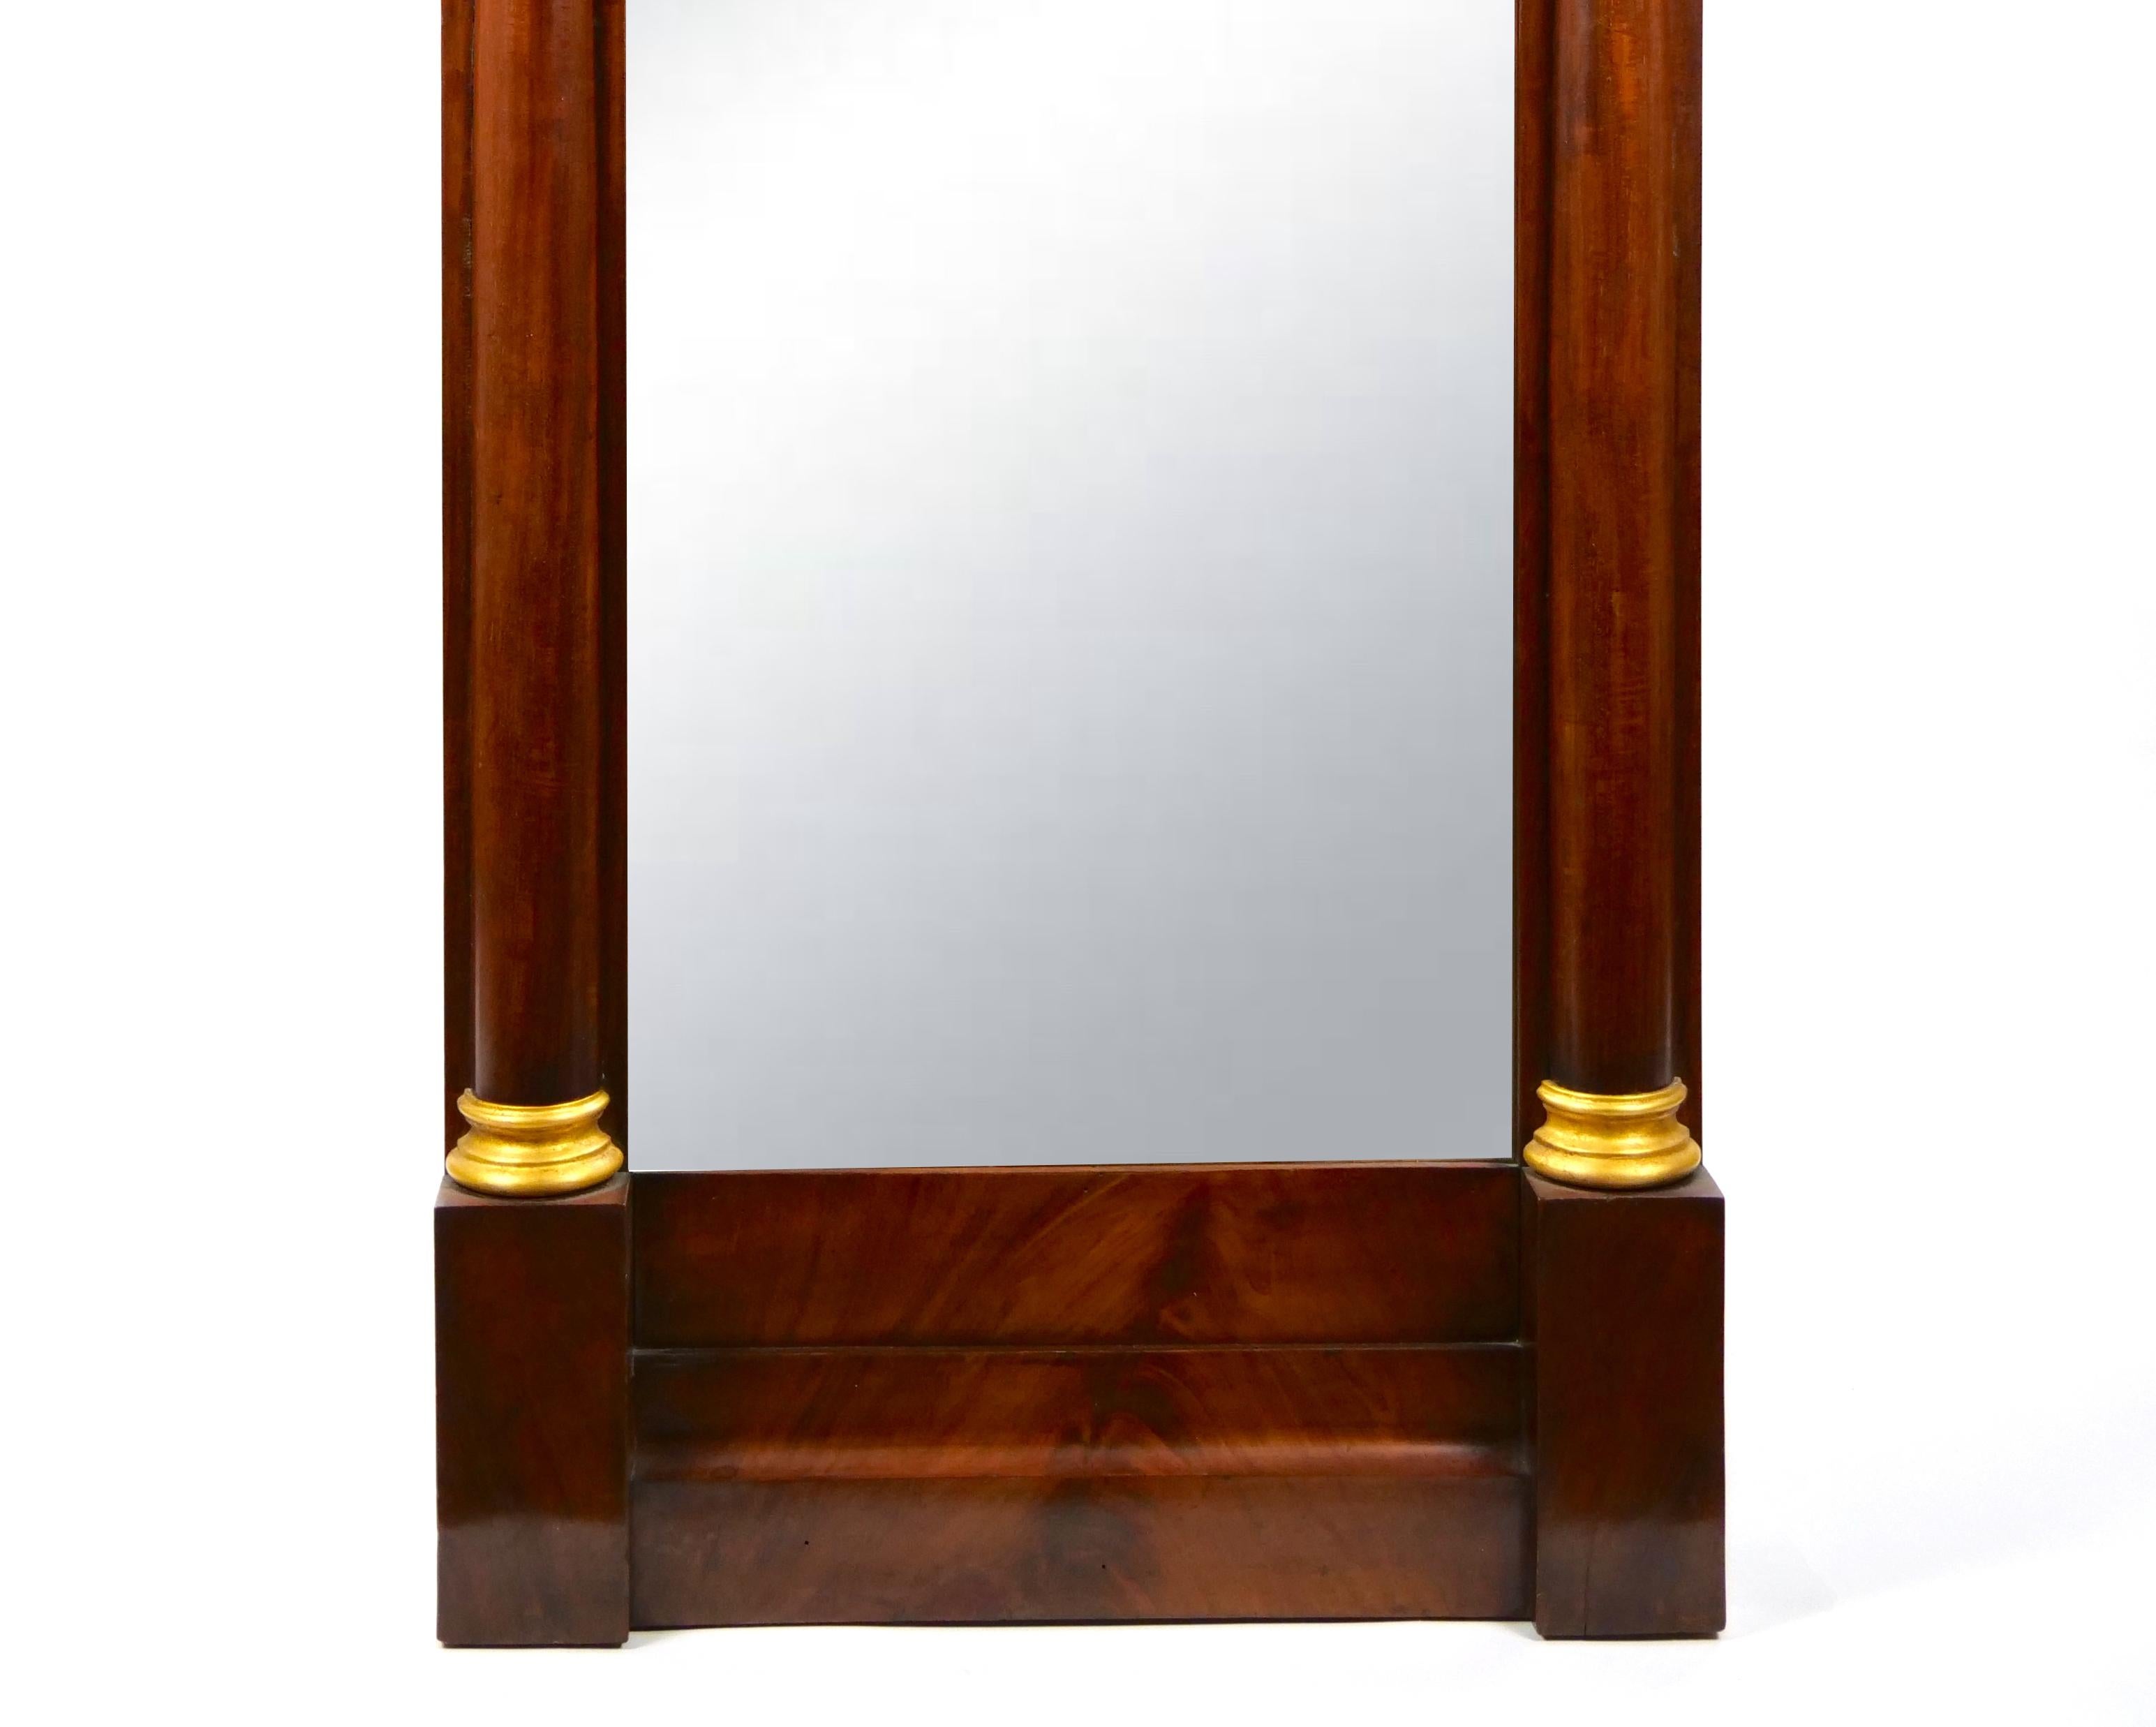 Empire Revival 19th Century Mahogany Wood Framed Bronze Mounted Pier Mirror For Sale